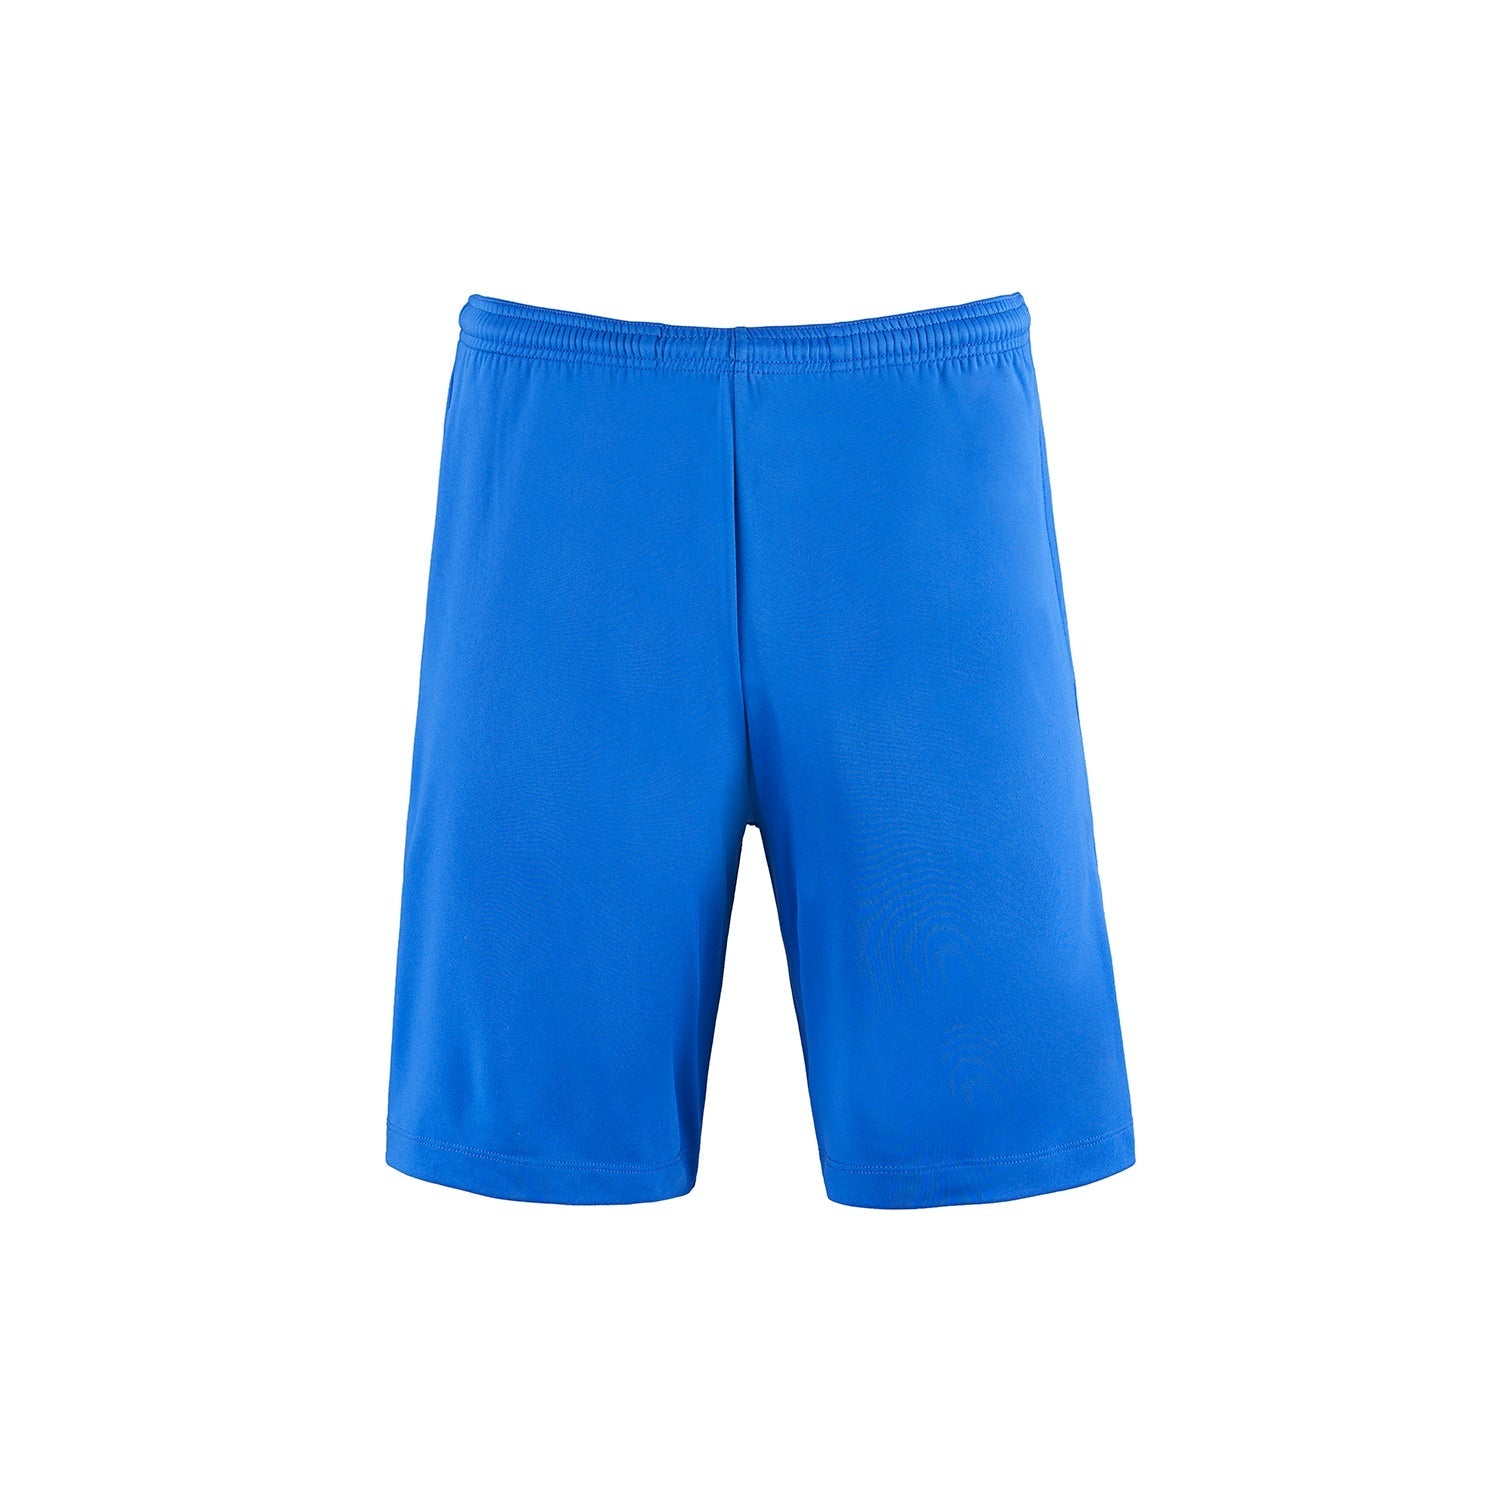 P4475Y - Wave - Youth Athletic Short with Pockets - Royal